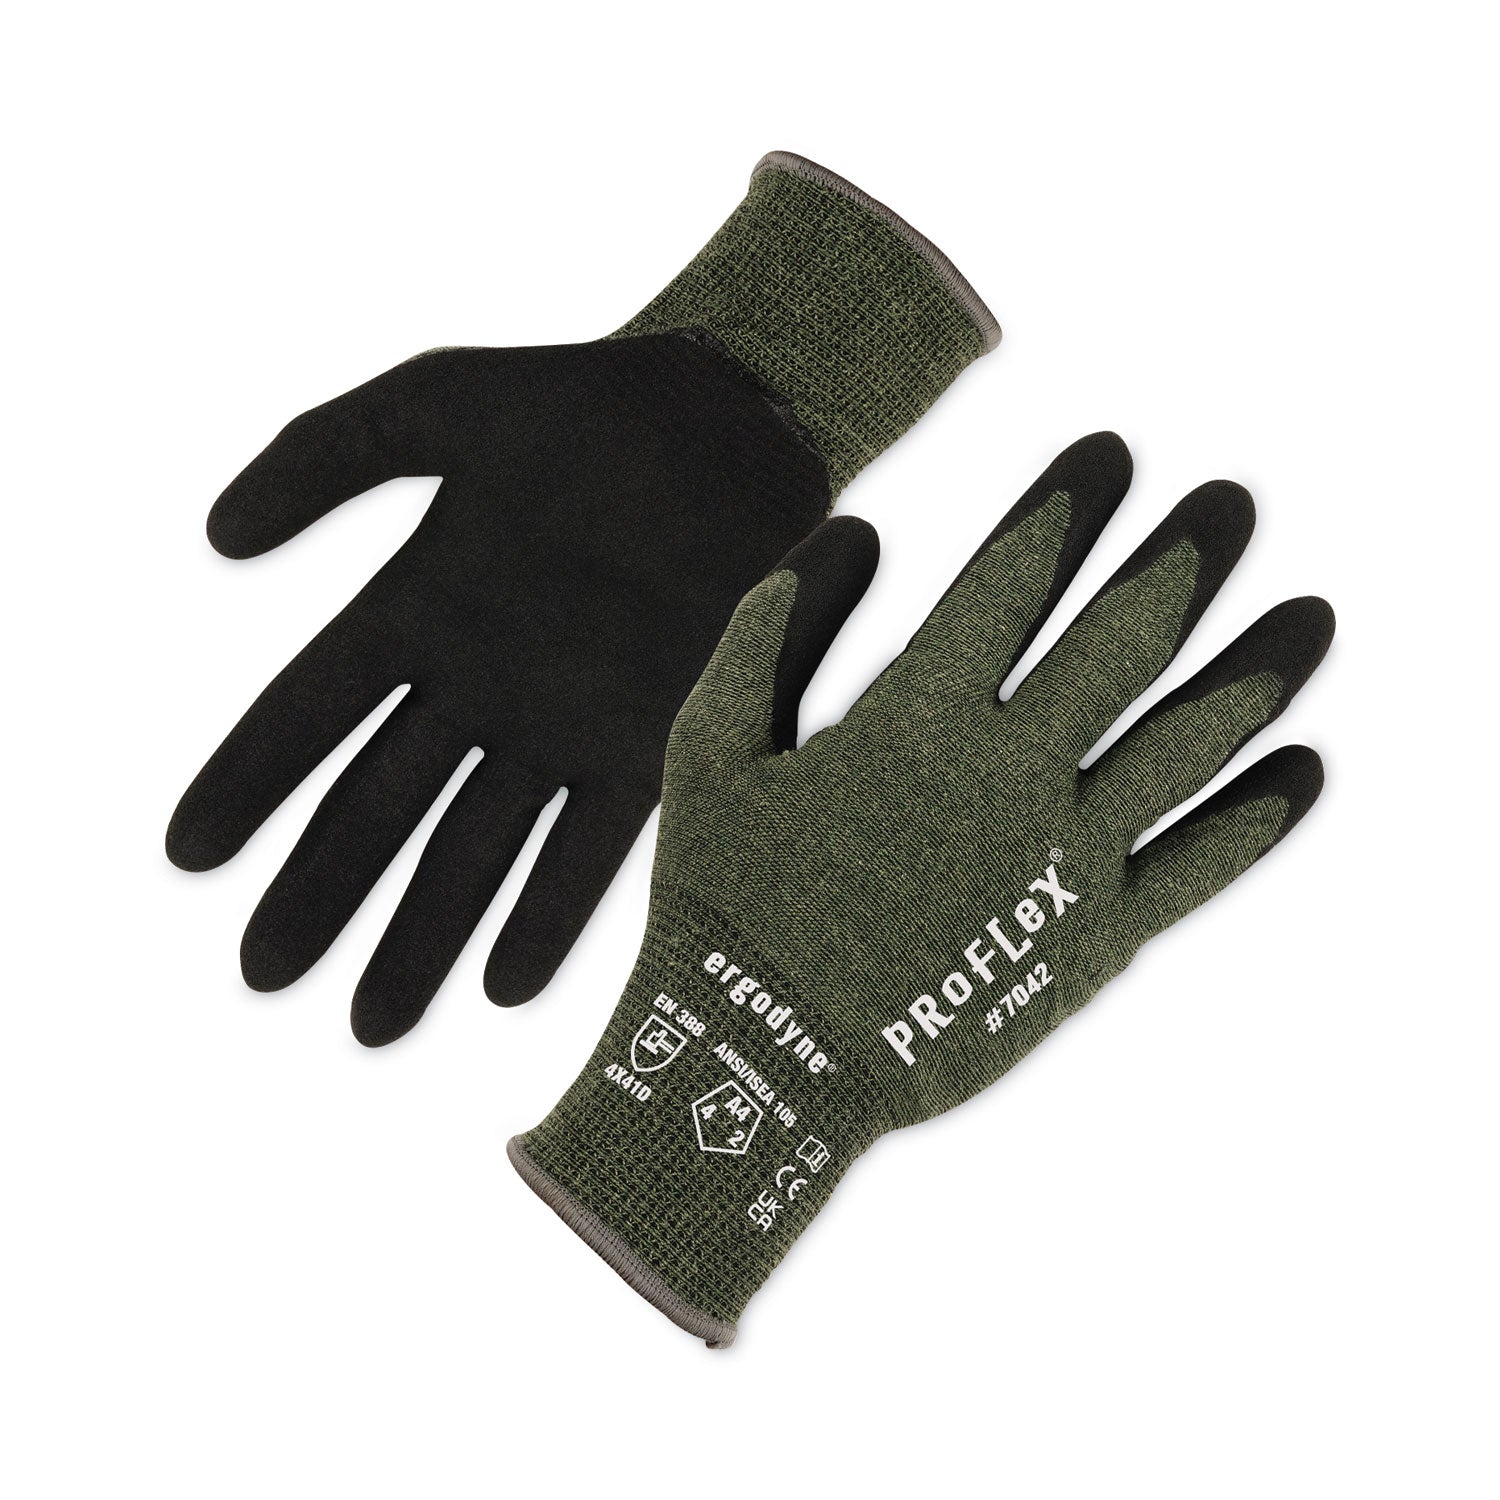 proflex-7042-ansi-a4-nitrile-coated-cr-gloves-green-large-12-pairs-pack-ships-in-1-3-business-days_ego10334 - 1